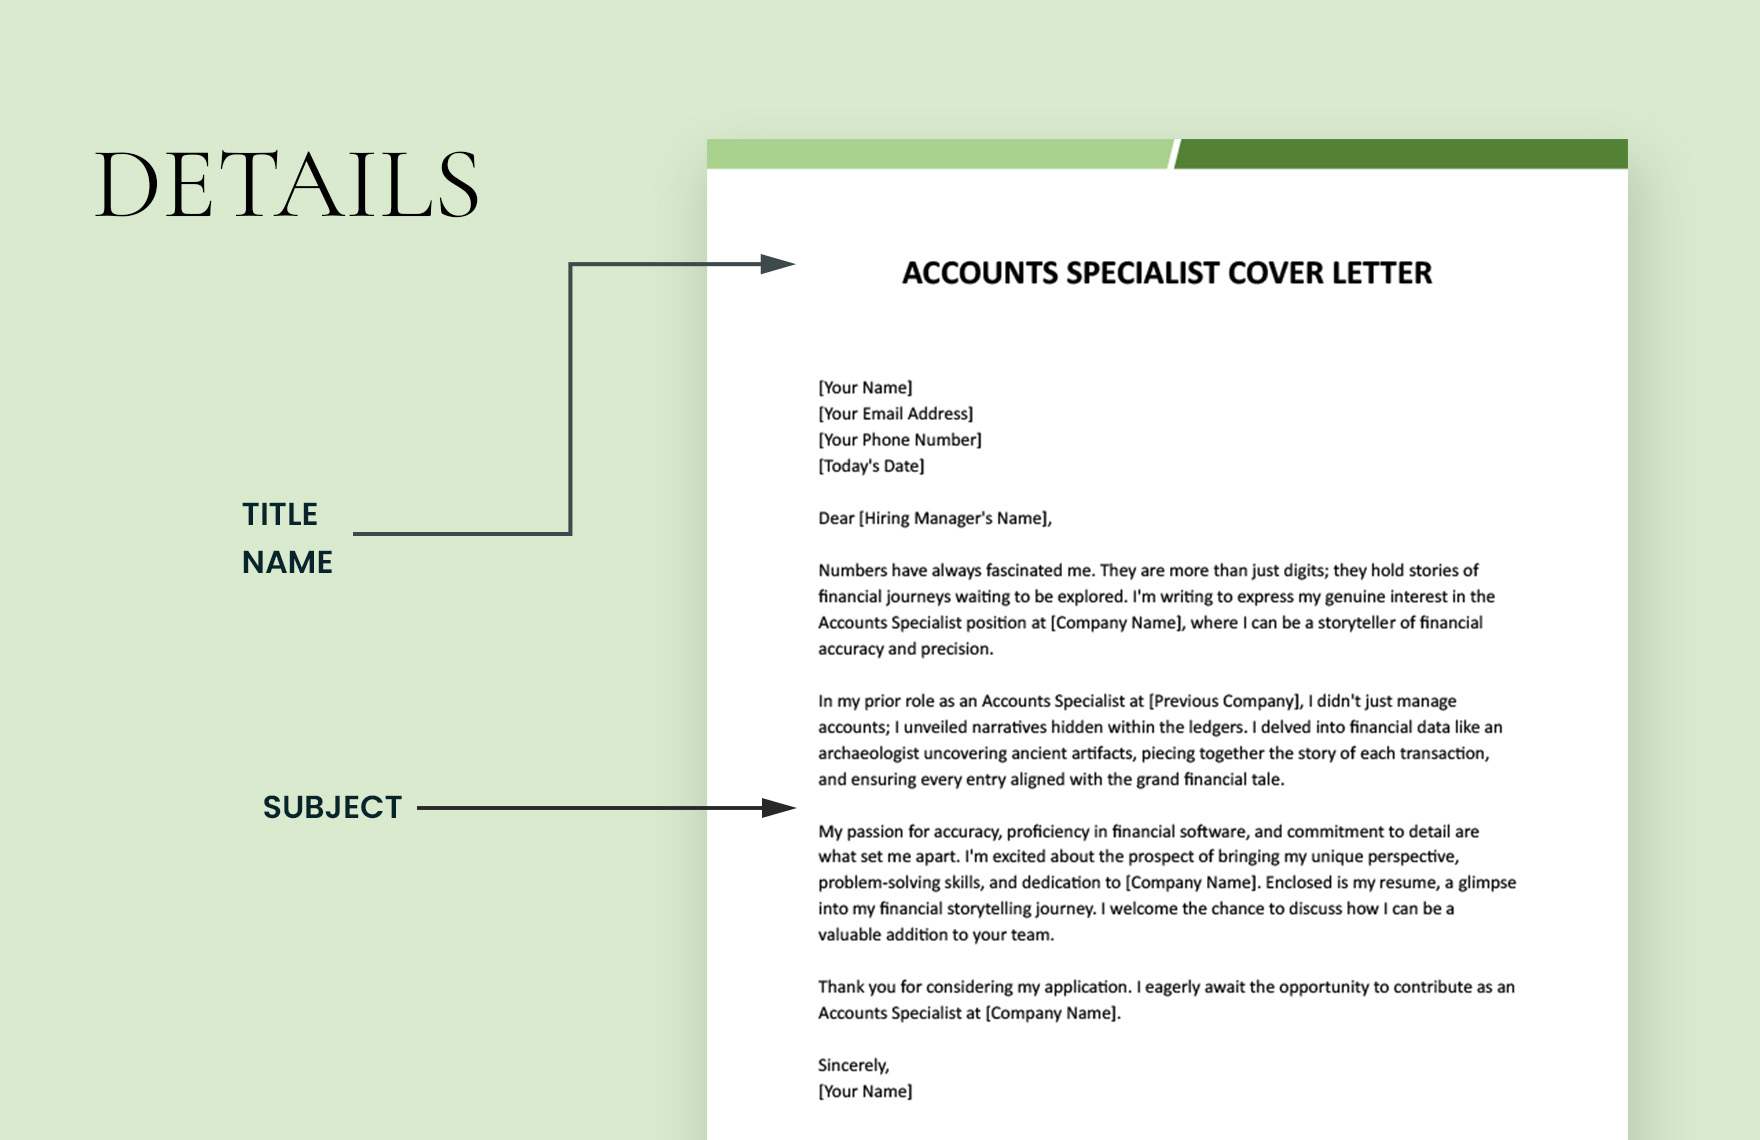 Accounts Specialist Cover Letter